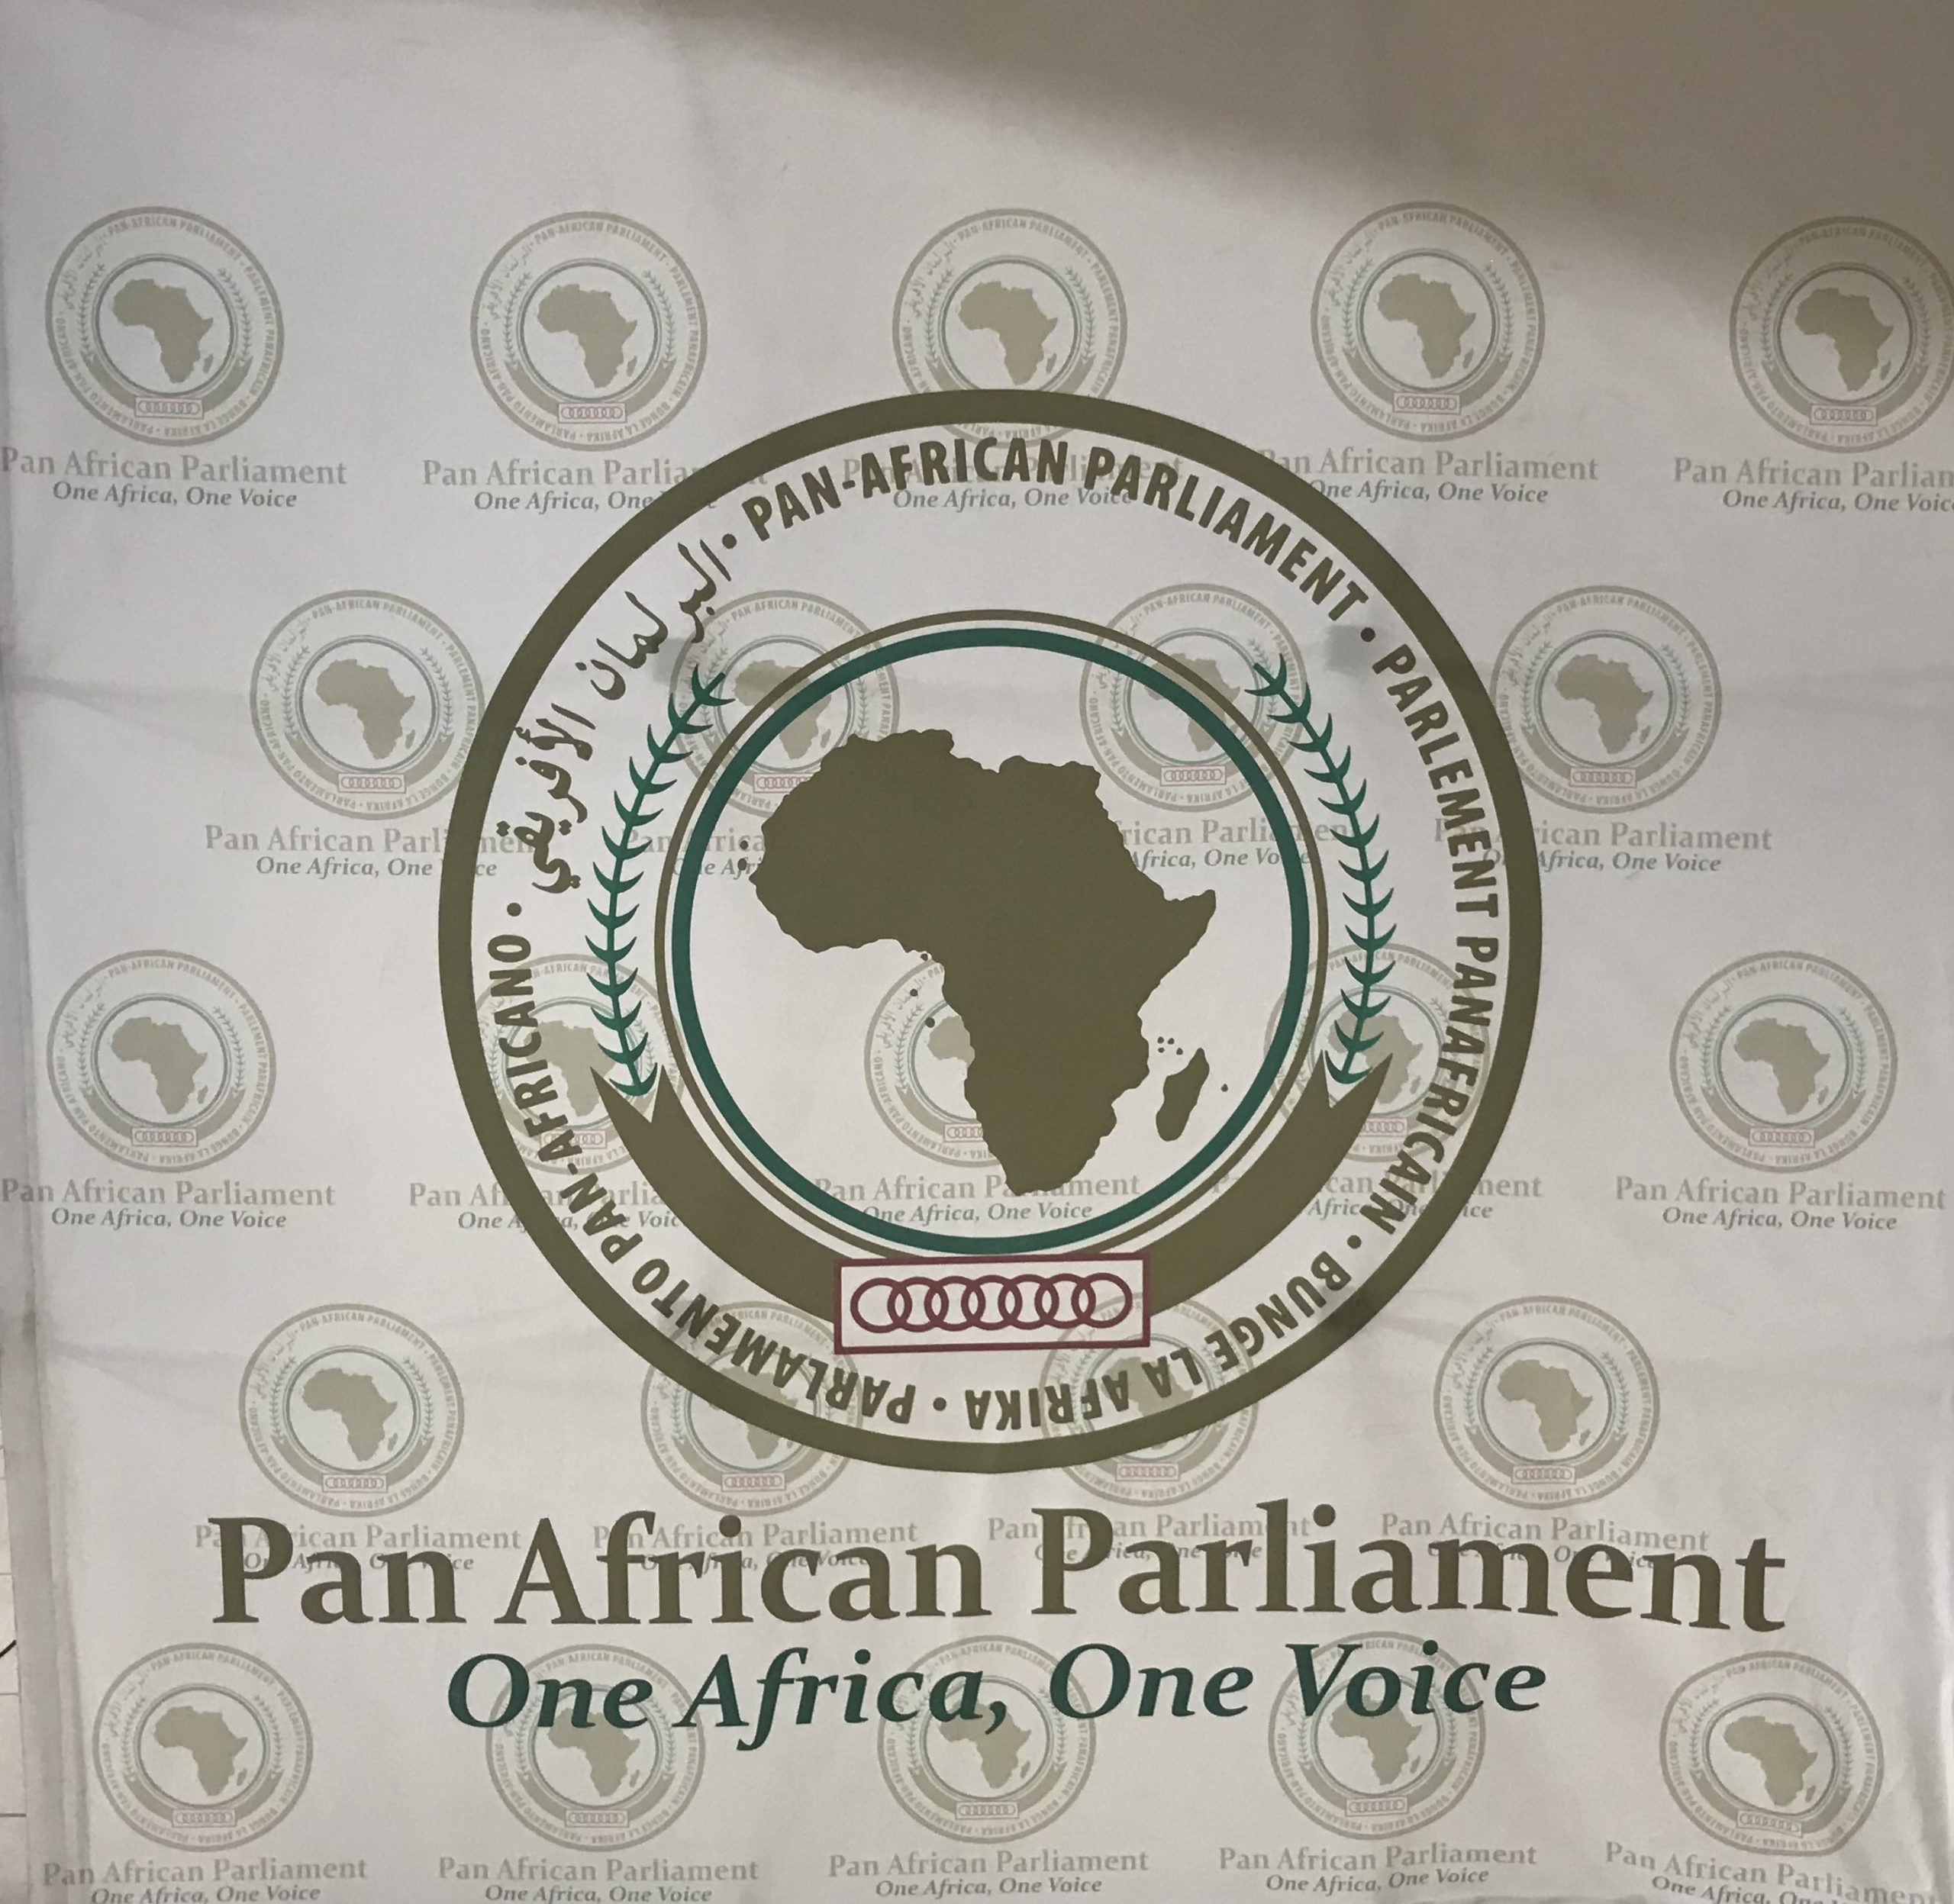 Beneficiate resources to avoid labour migration, says the Pan African Parliament